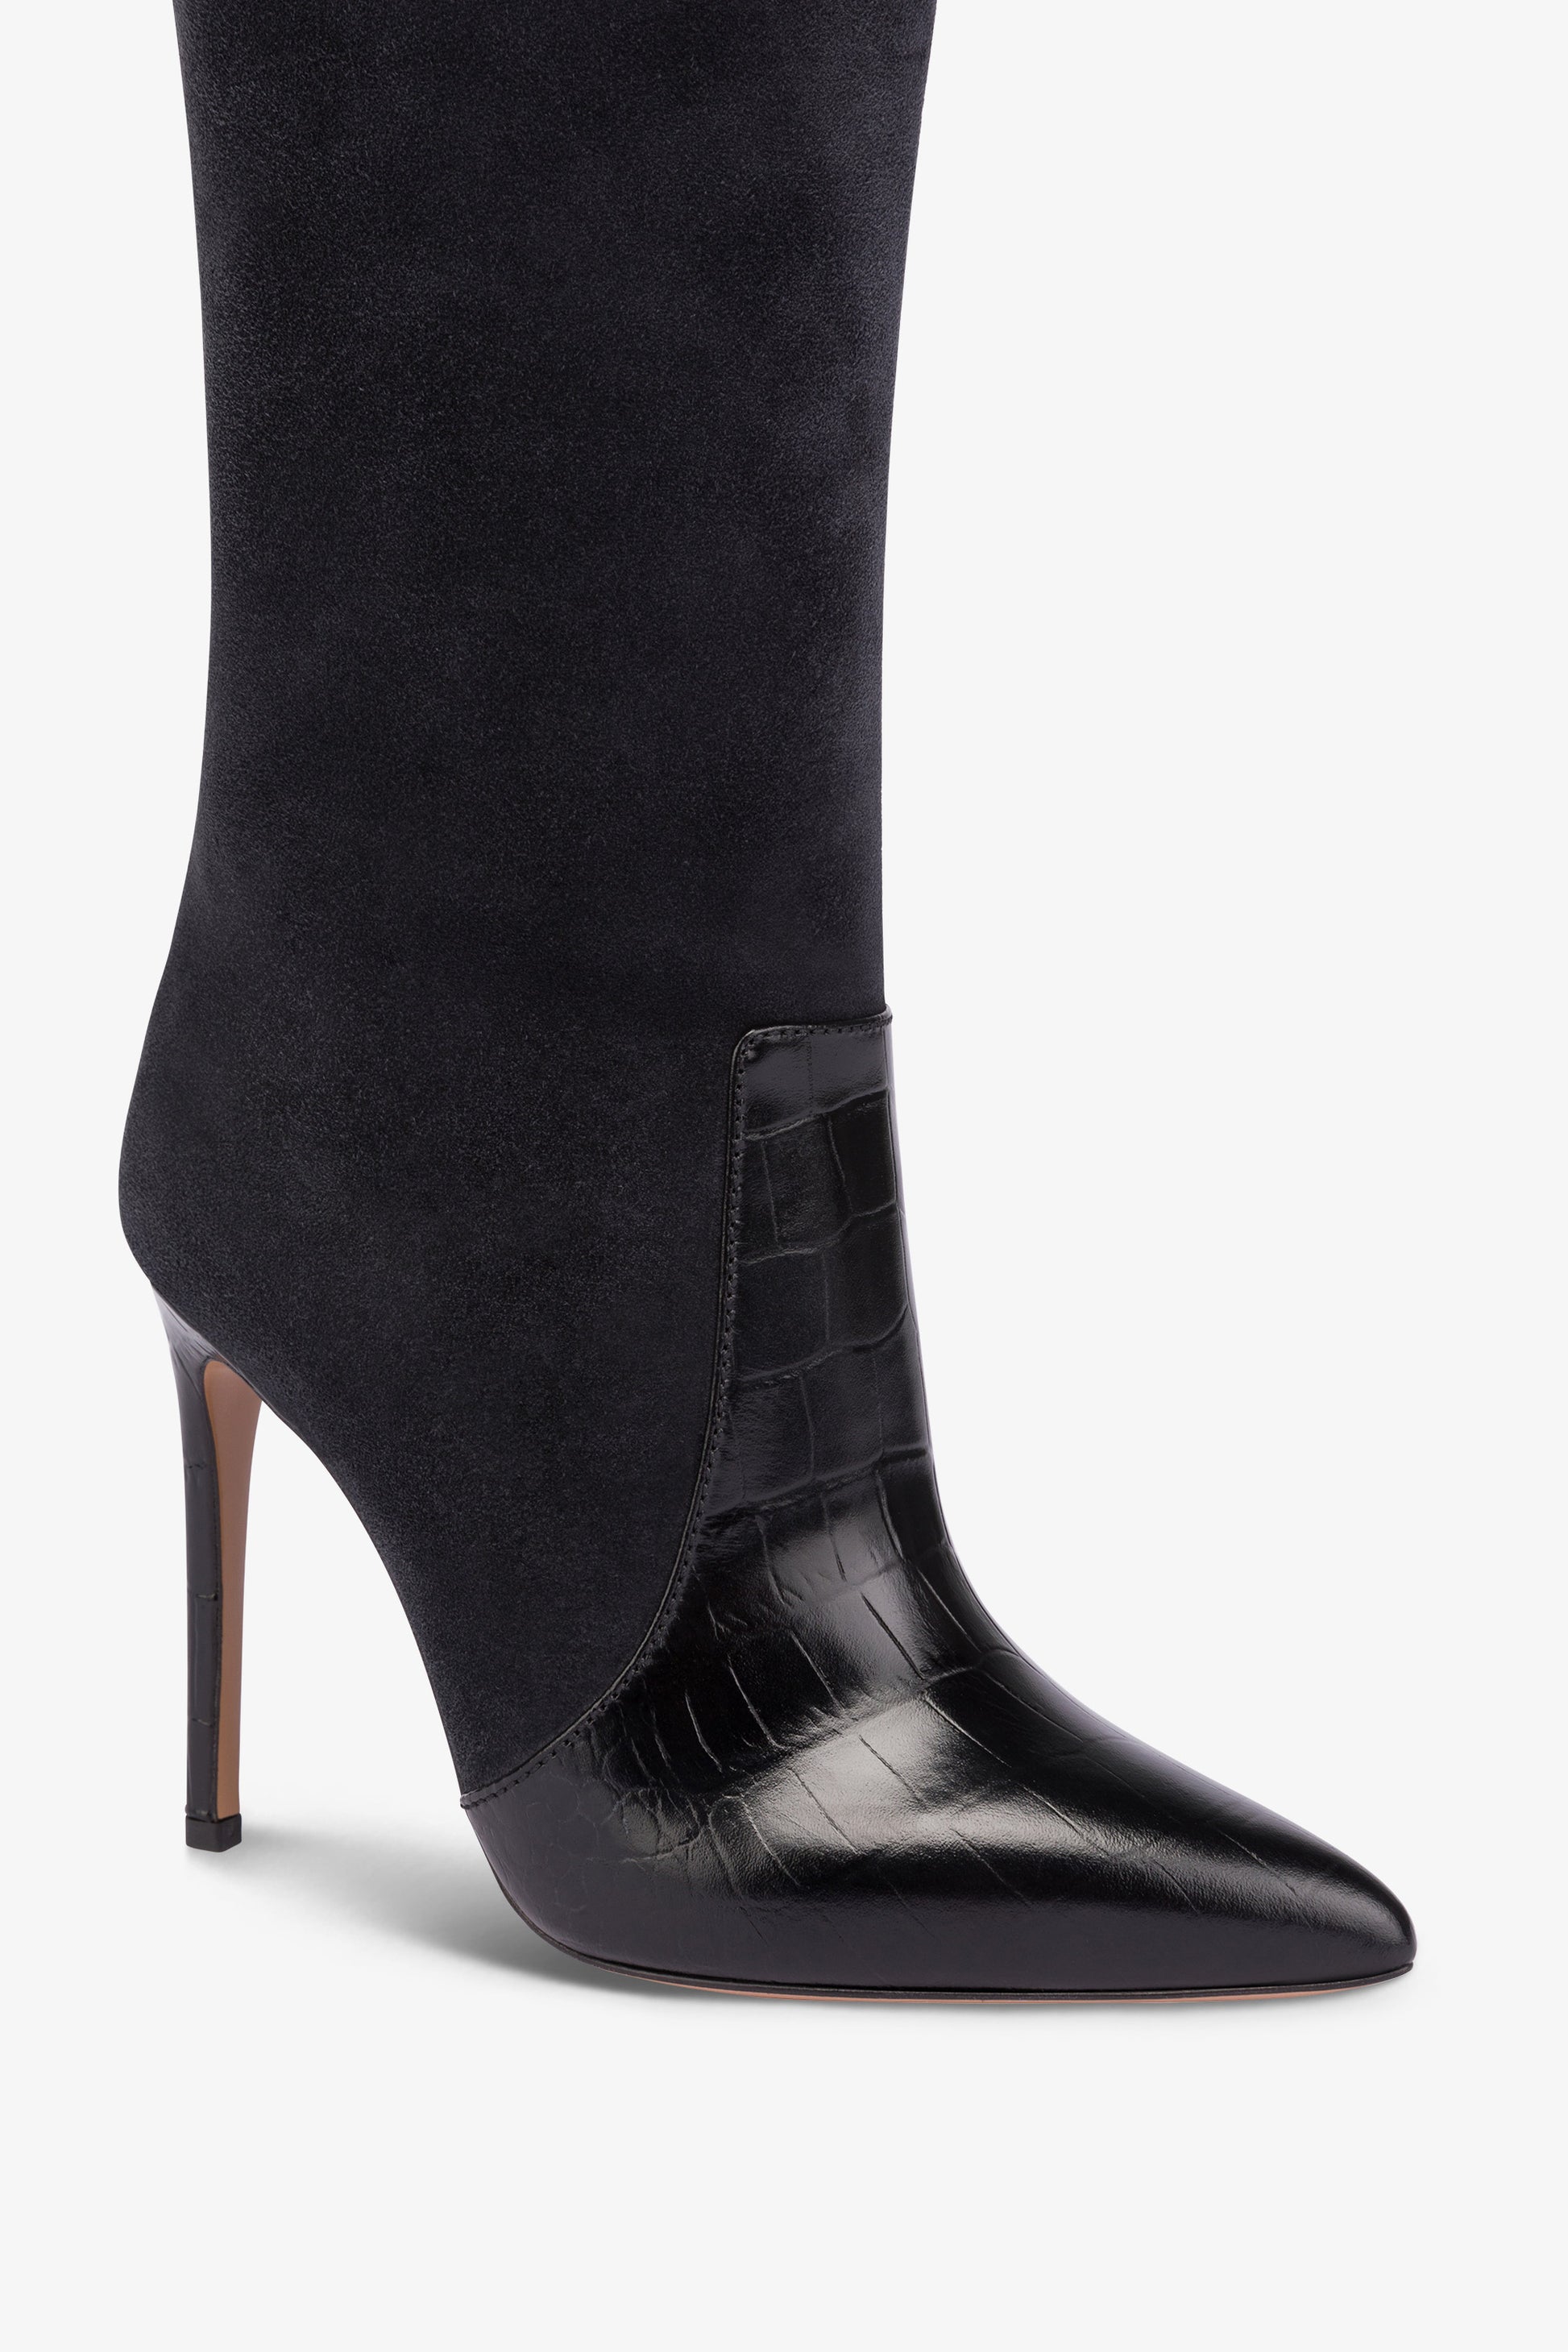 Pointed boots in black and off-black suede and soft croco-embossed leather